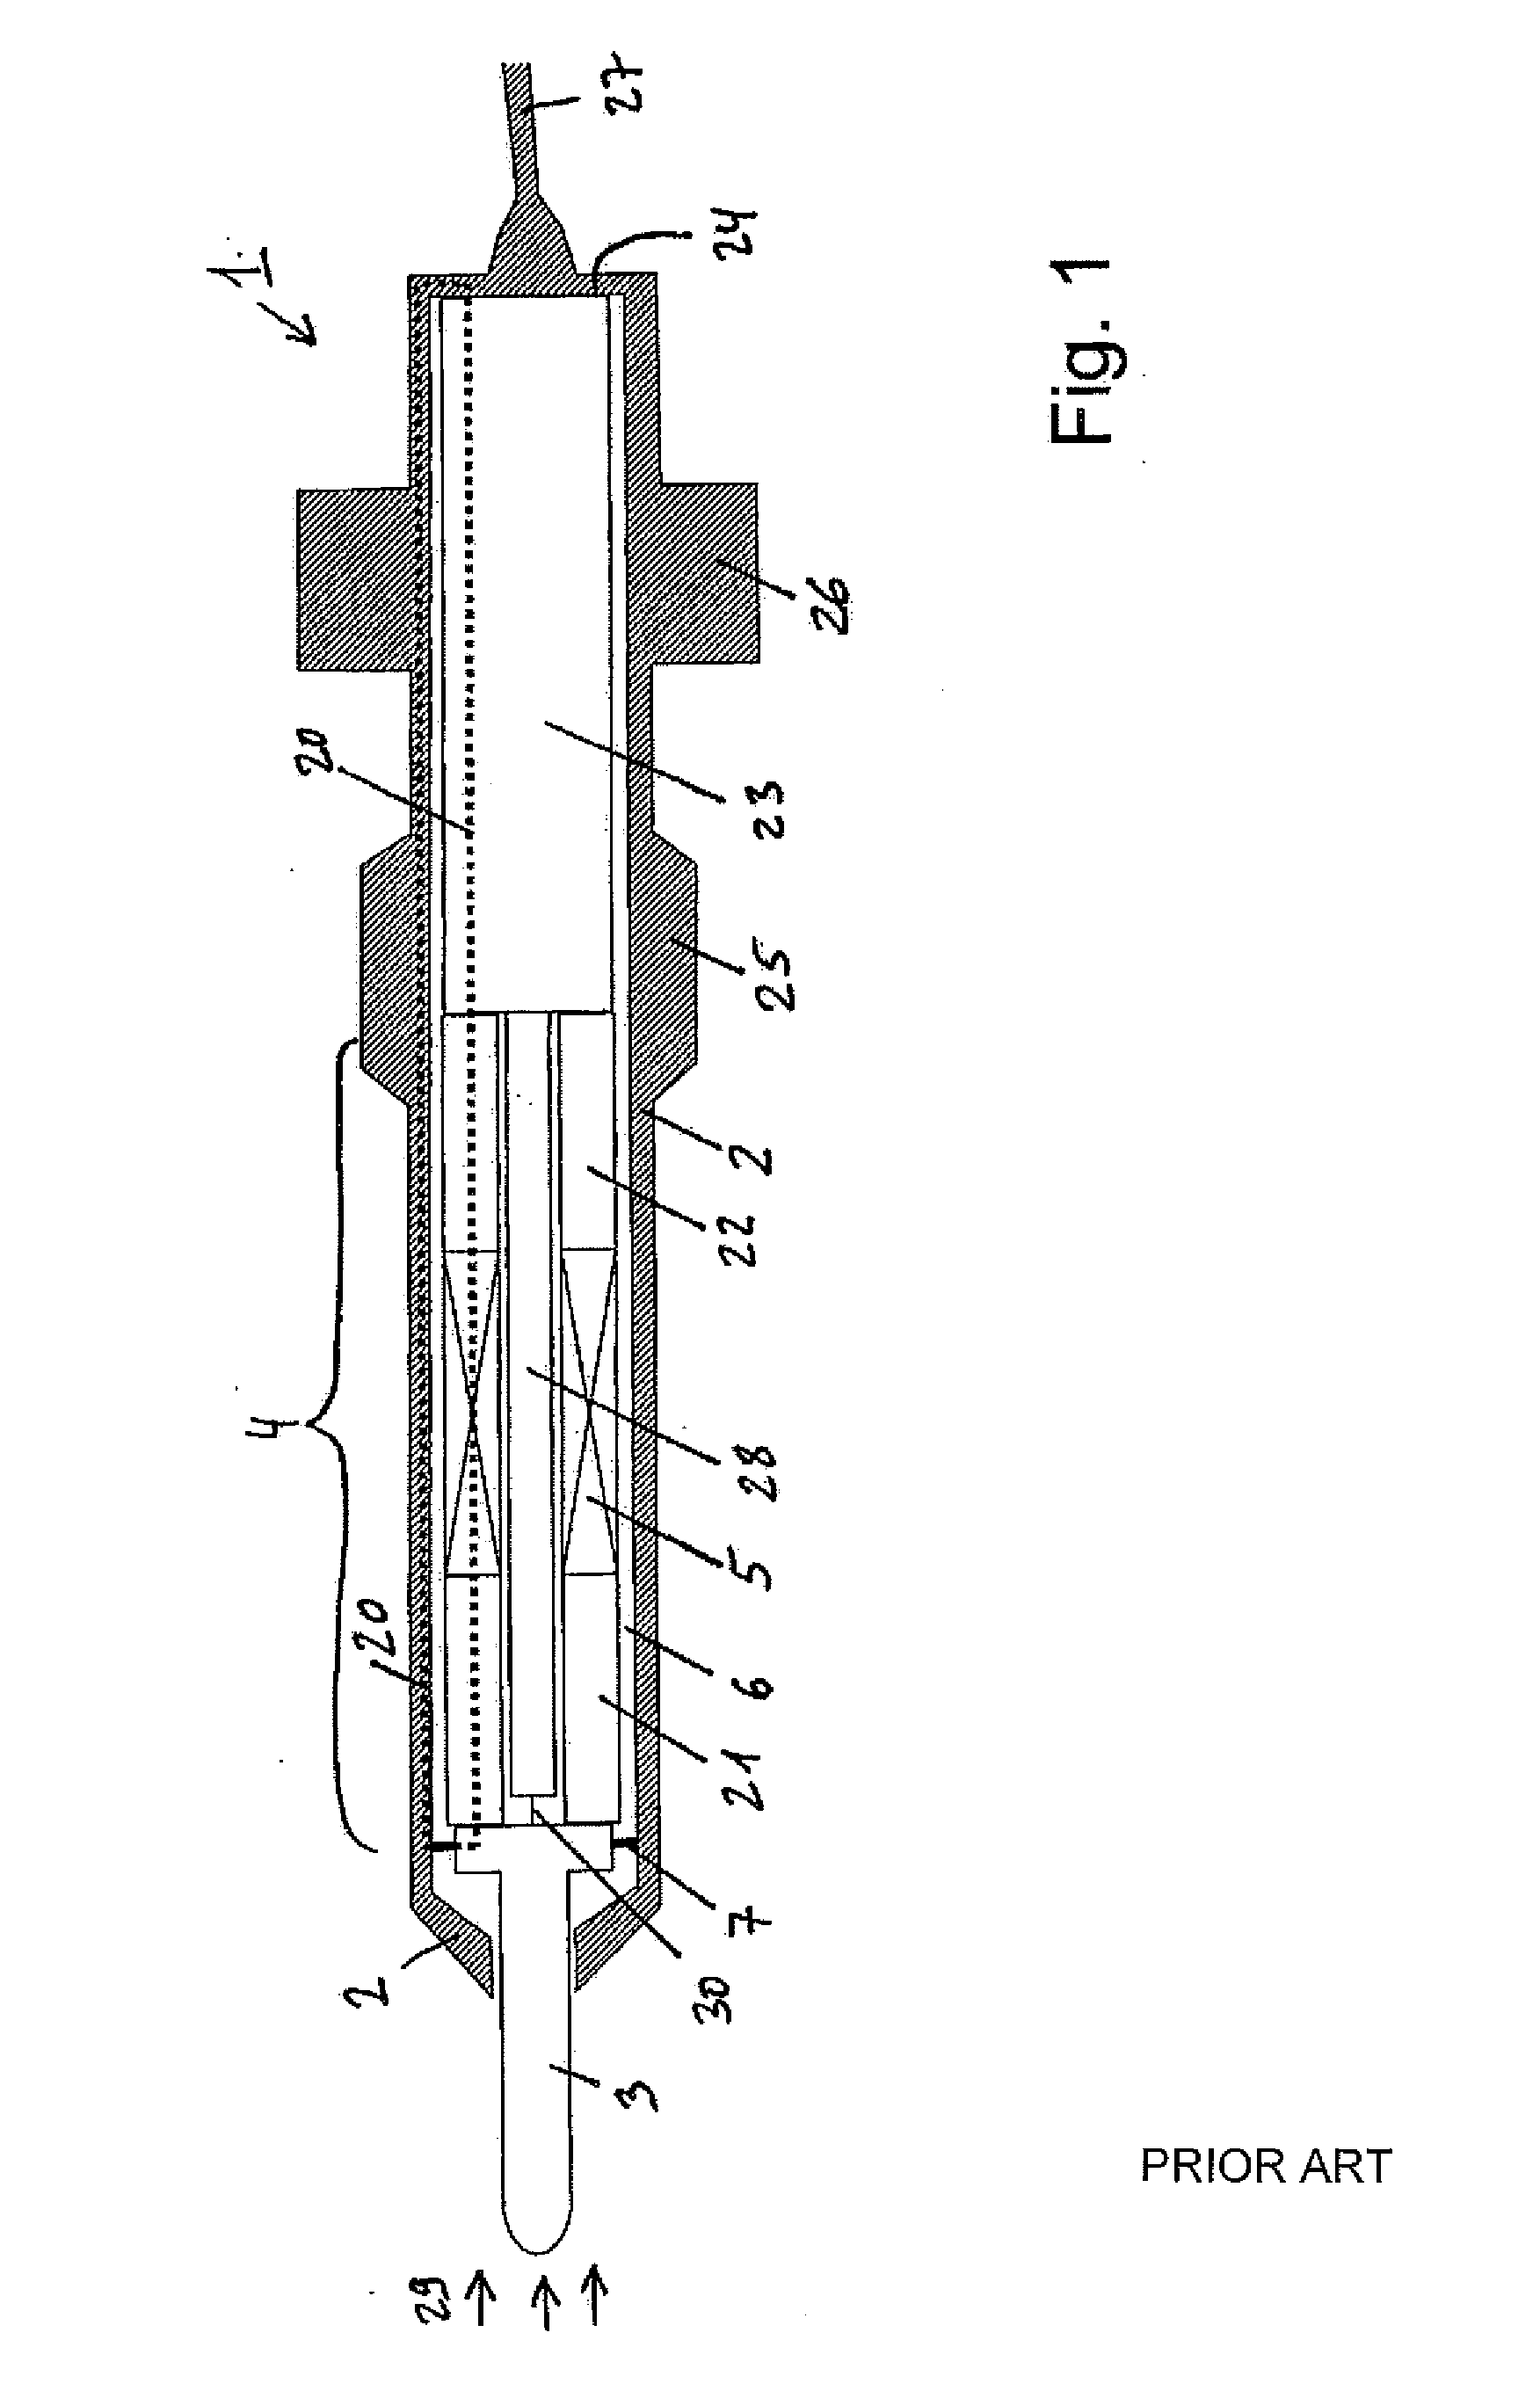 Pressure sensor for measurements in a chamber of an internal combustion engine